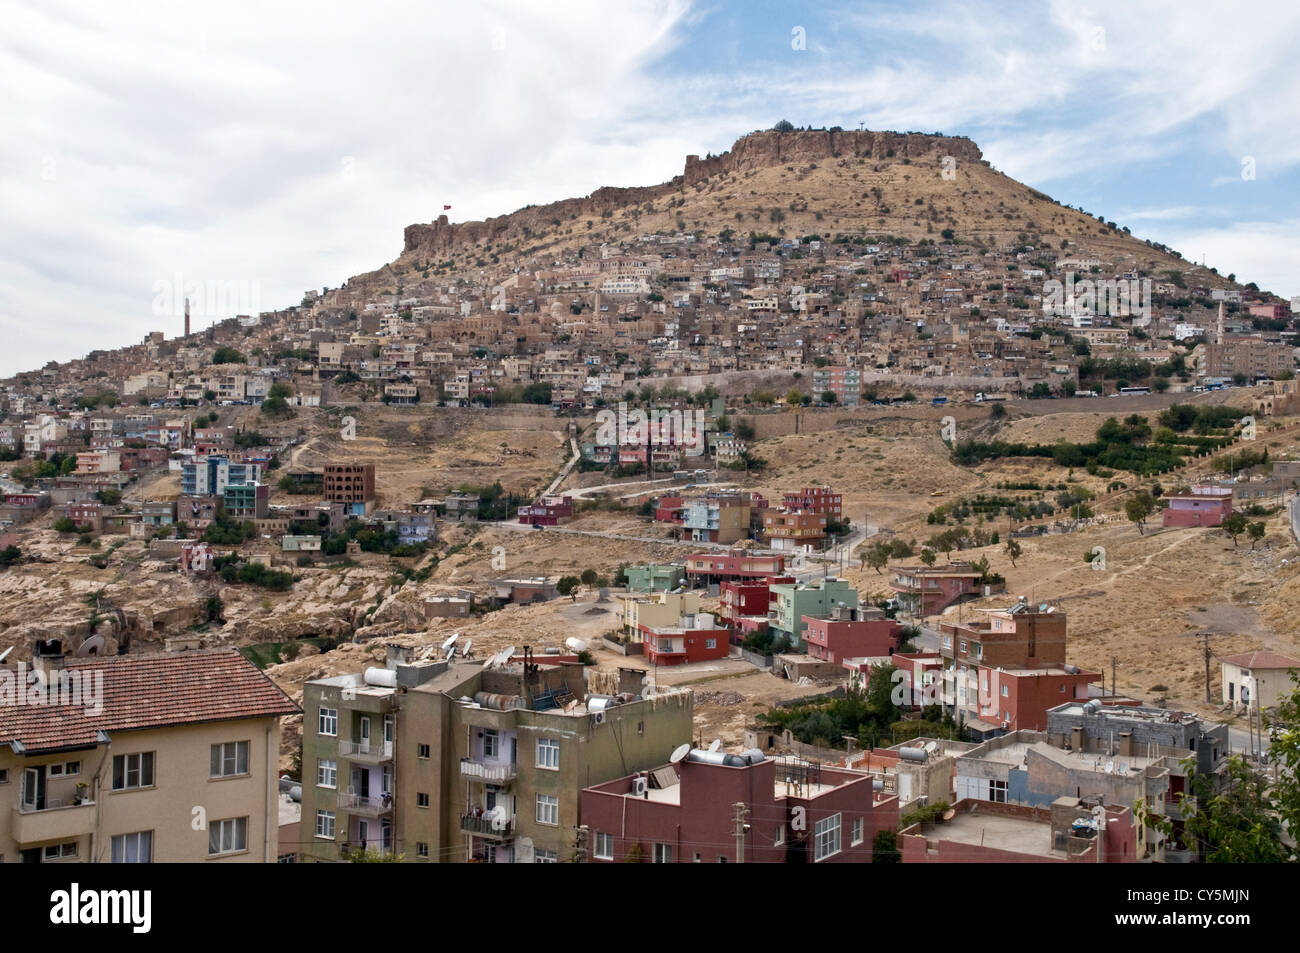 The ancient Turkish hillside city of Mardin located in the eastern Anatolia region of southeastern Turkey, near the border with Syria. Stock Photo